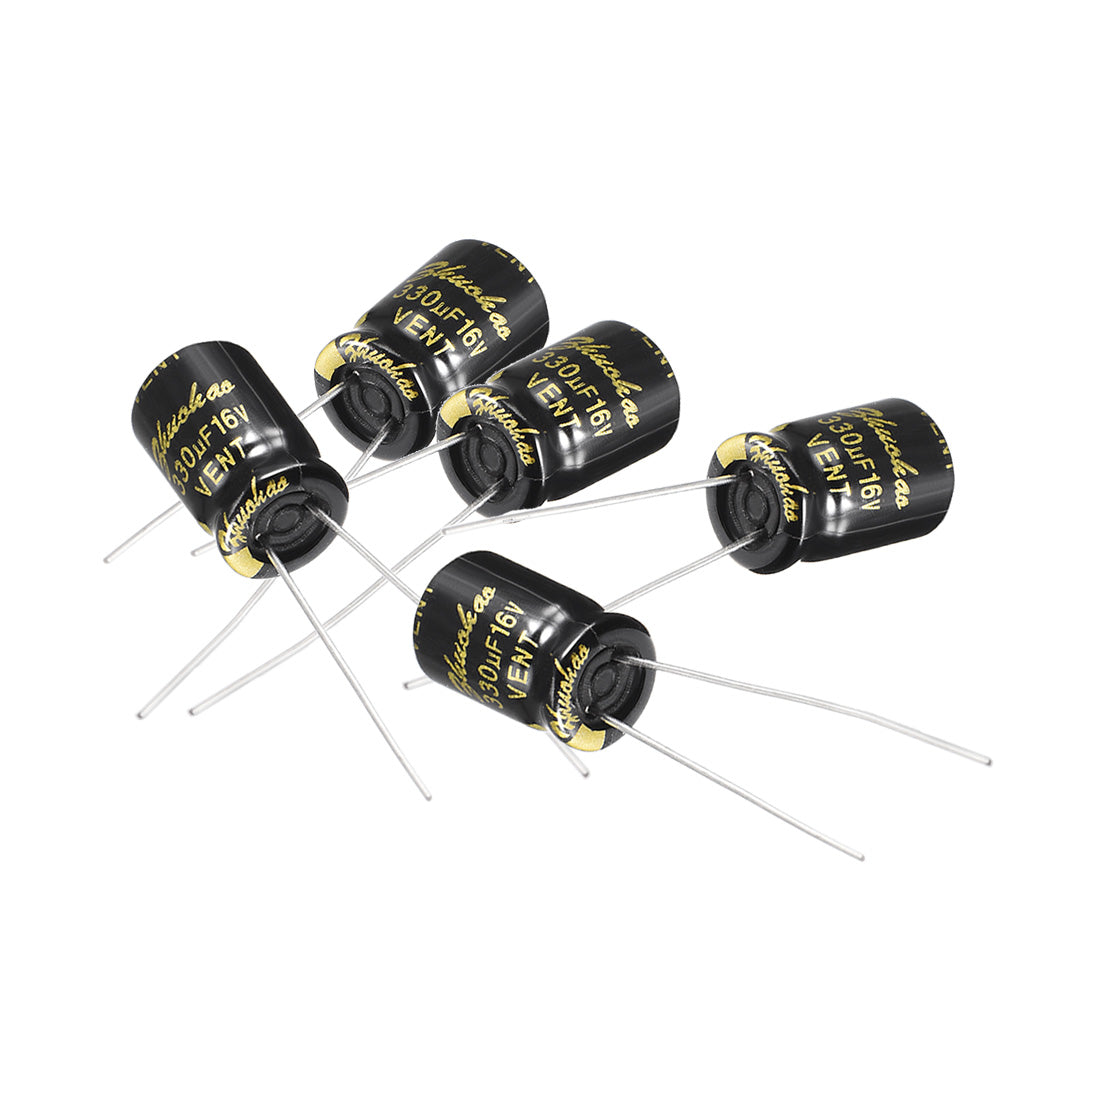 uxcell Uxcell Aluminum Radial Electrolytic Capacitor with 330uF 16V 105 Celsius Life 2000H 8 x 12 mm Black 5pcs